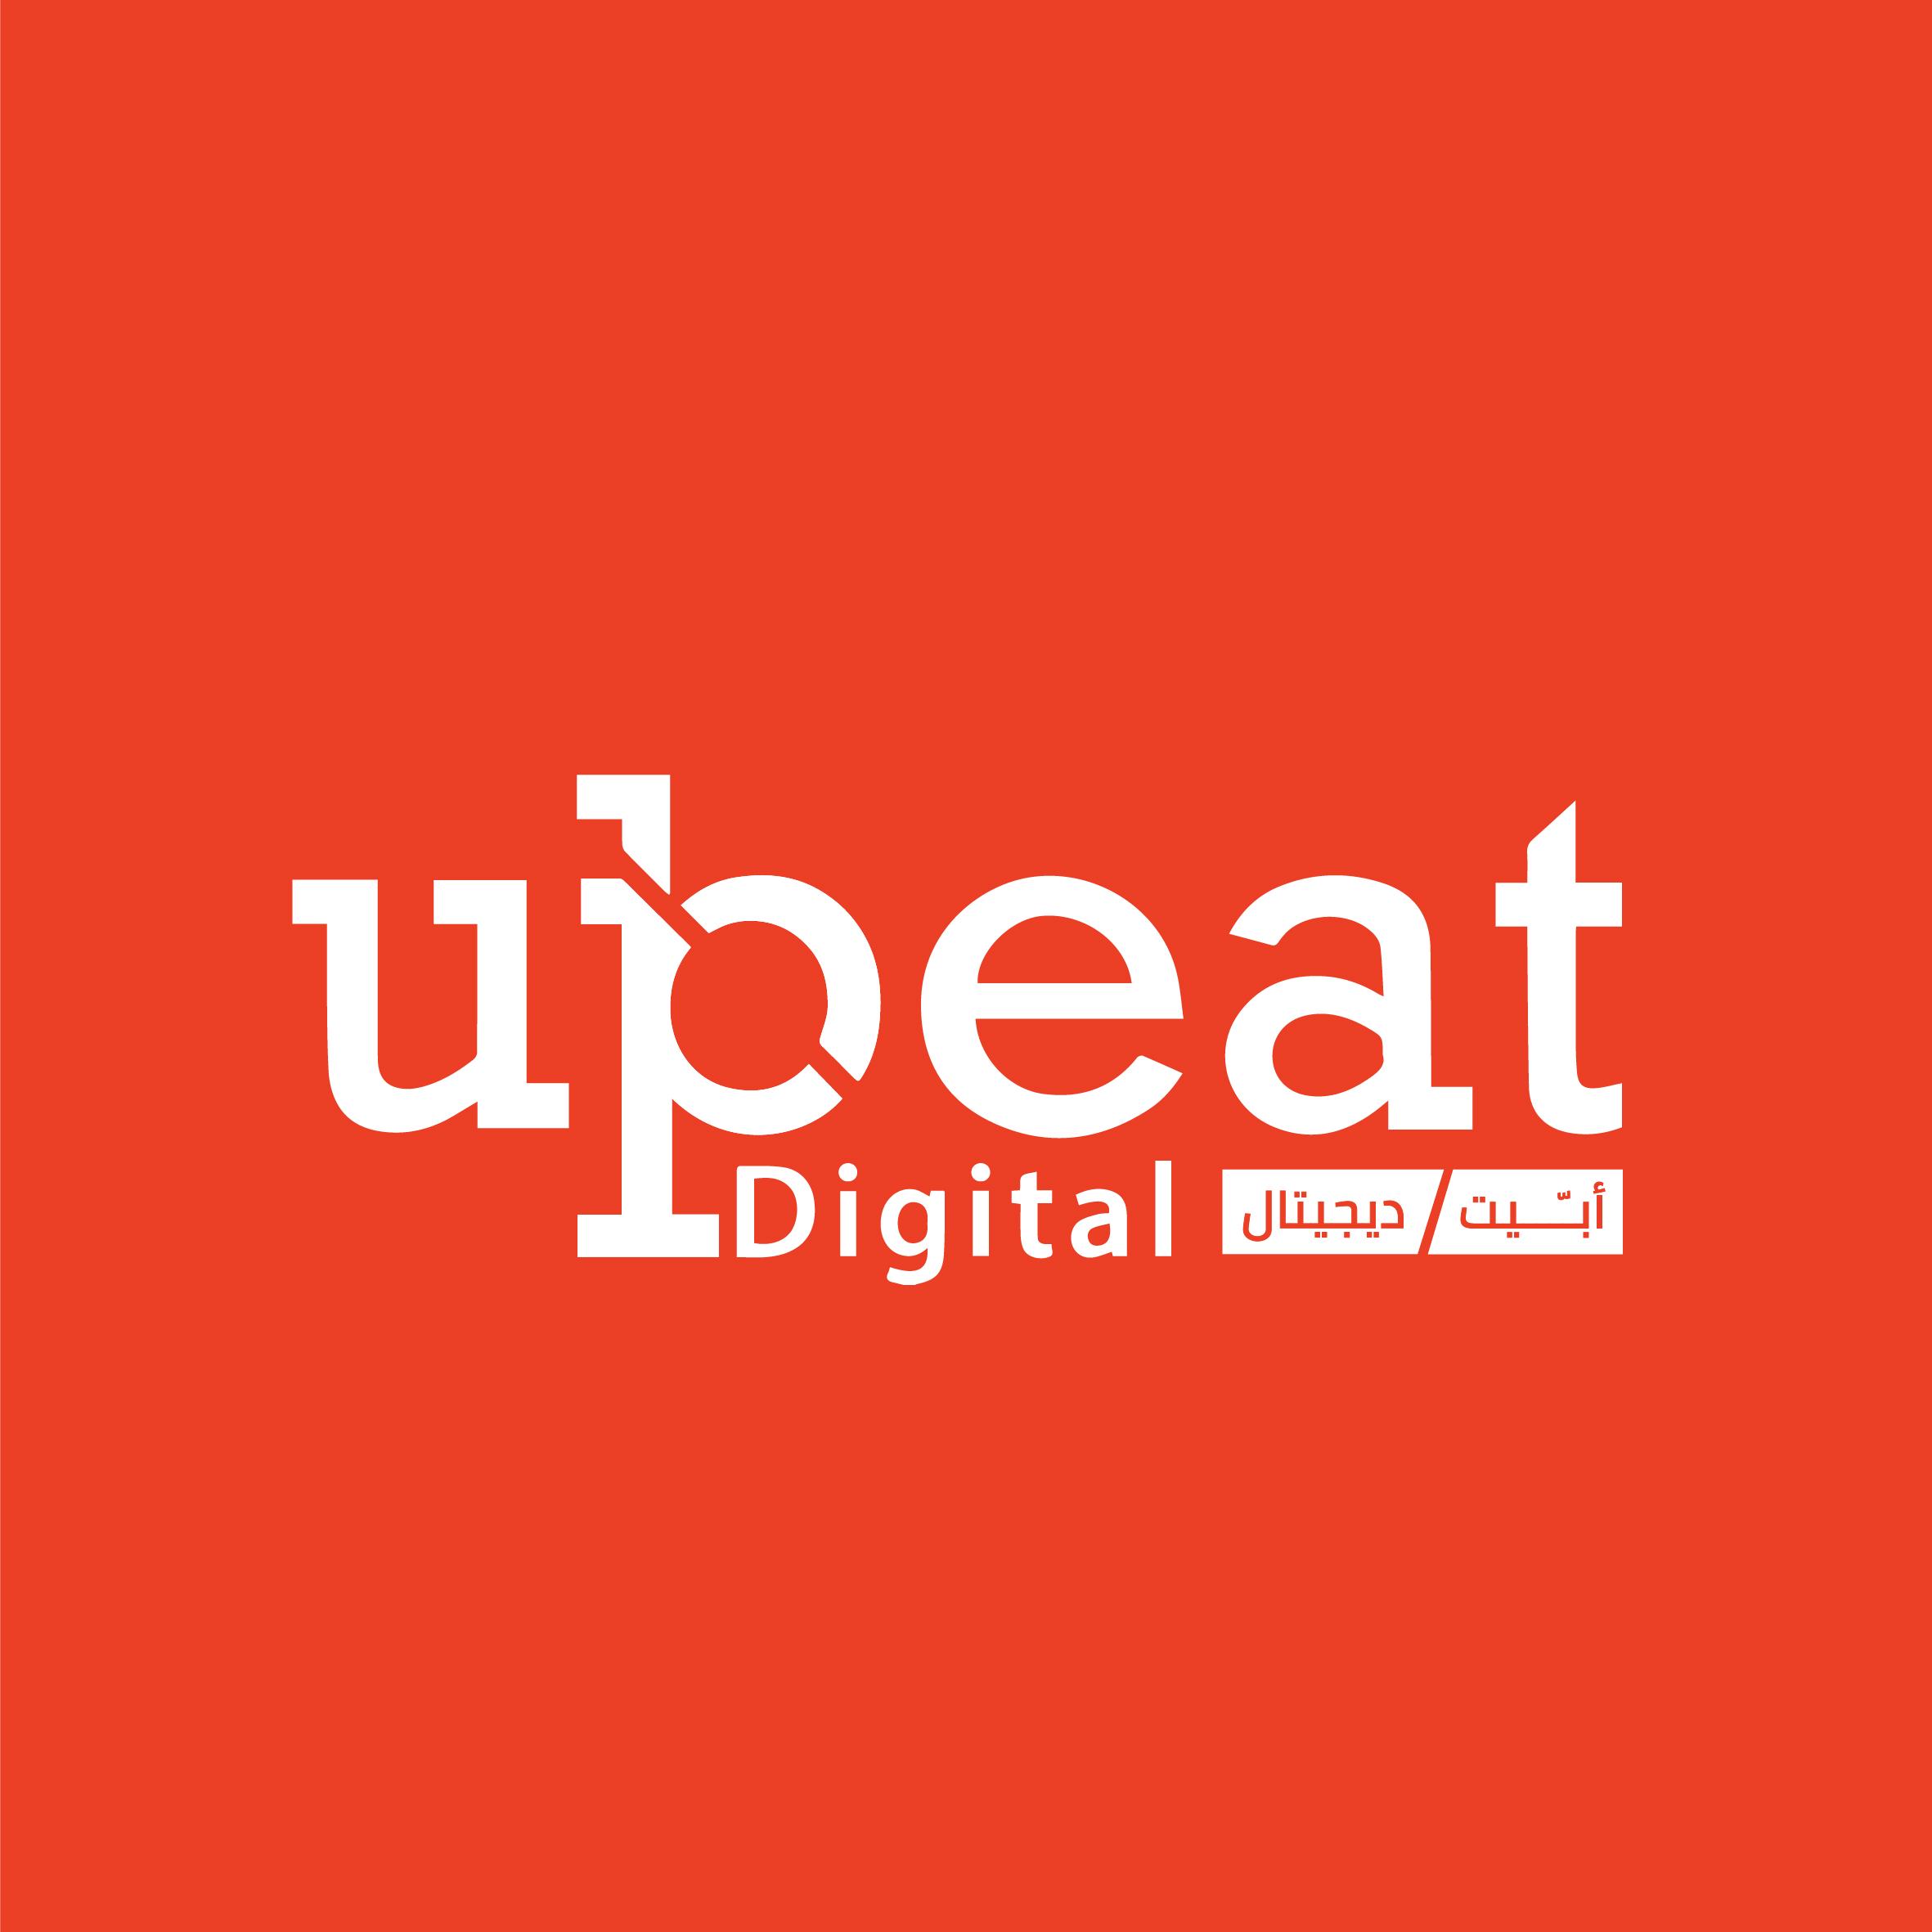 Upbeat Digital profile on Qualified.One